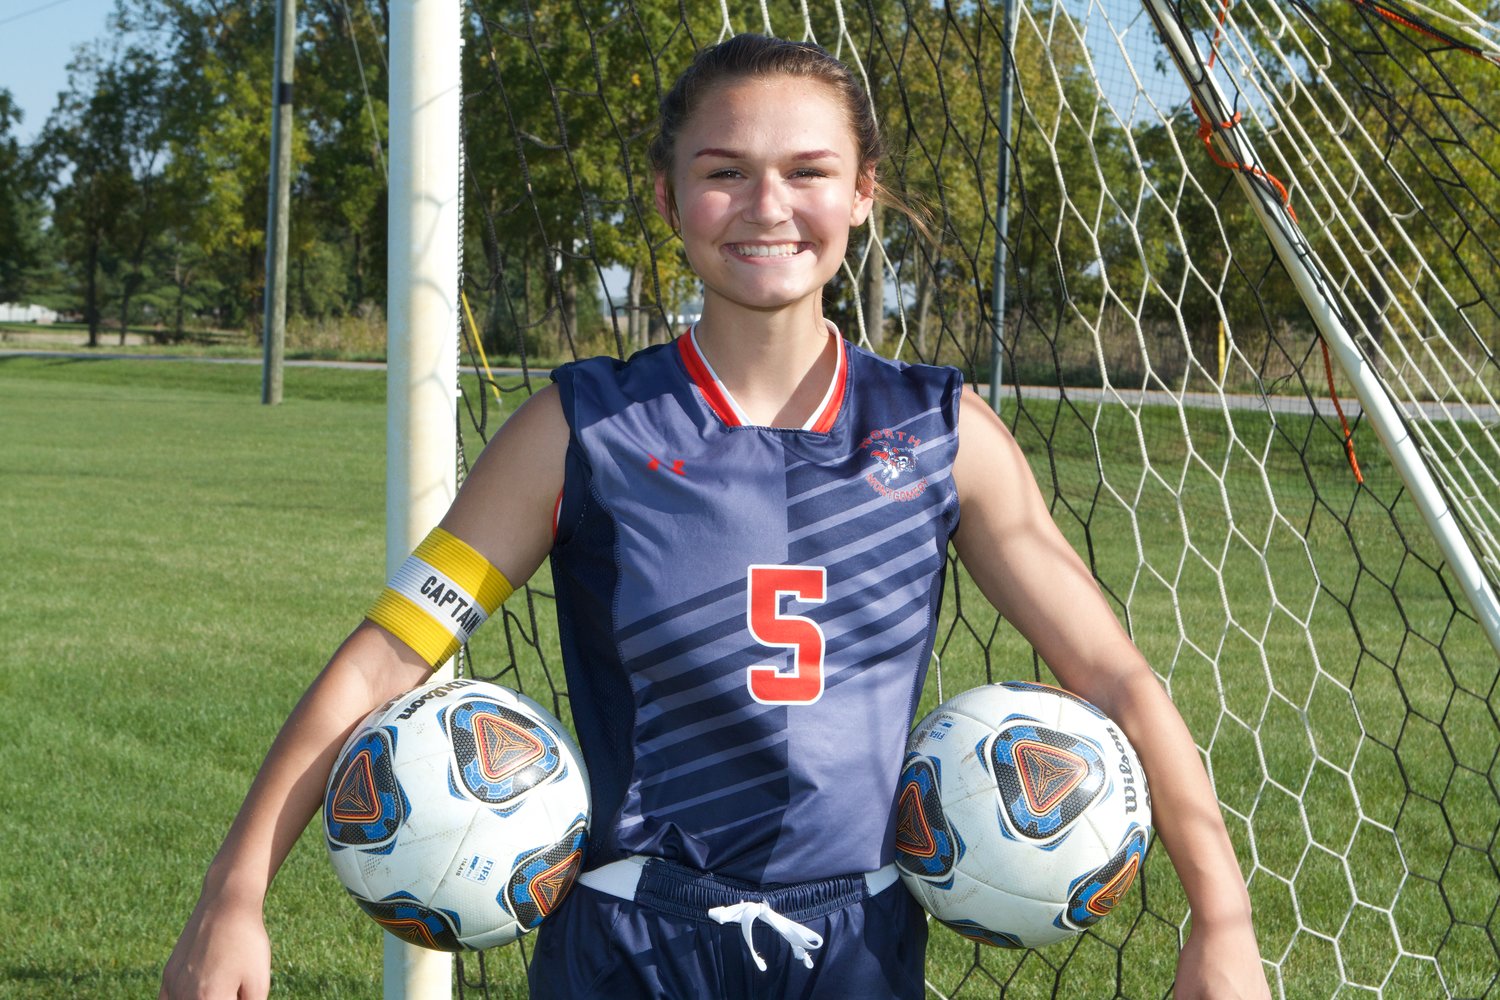 Teegan Bacon had arguably her best performance of her career as the JR Player of the Year scored all 6 of the Chargers goals in a 6-4 history making win over Lebanon.